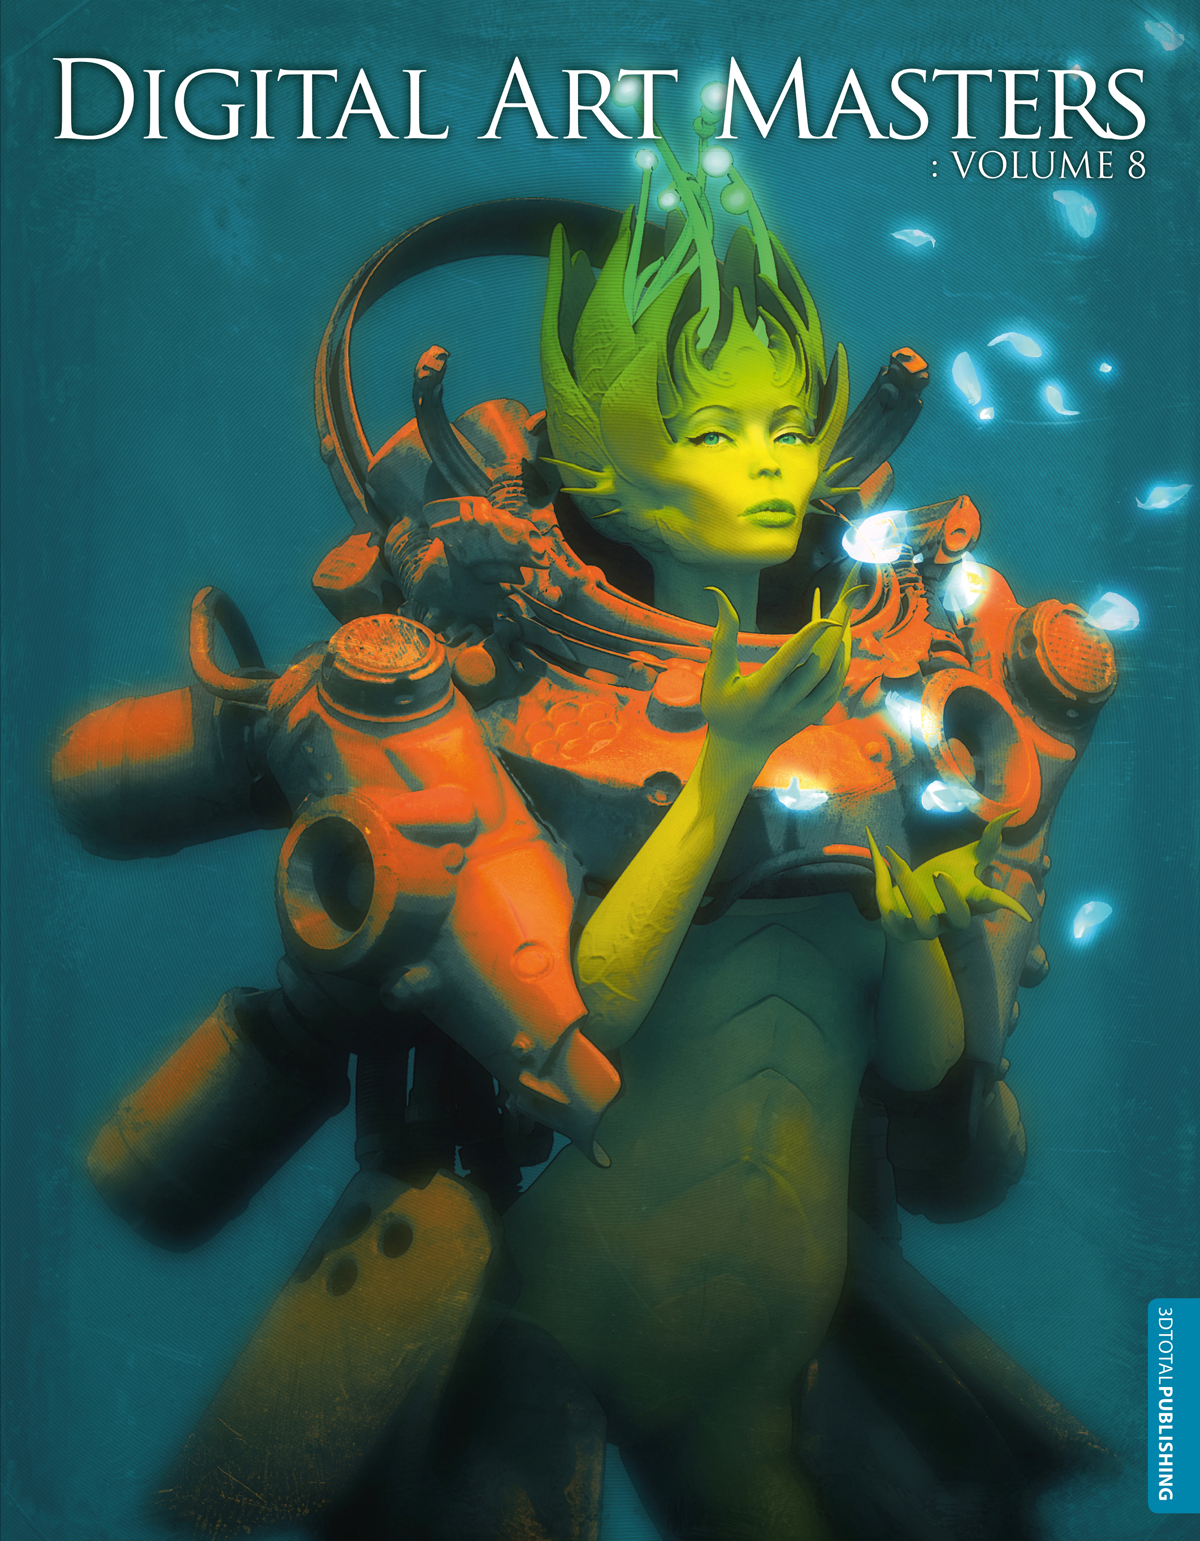 'Digital Art Masters: Volume 8' fantasy cover showing a green-skinned, mermaid-like diver, underwater, wearing a diving suit.